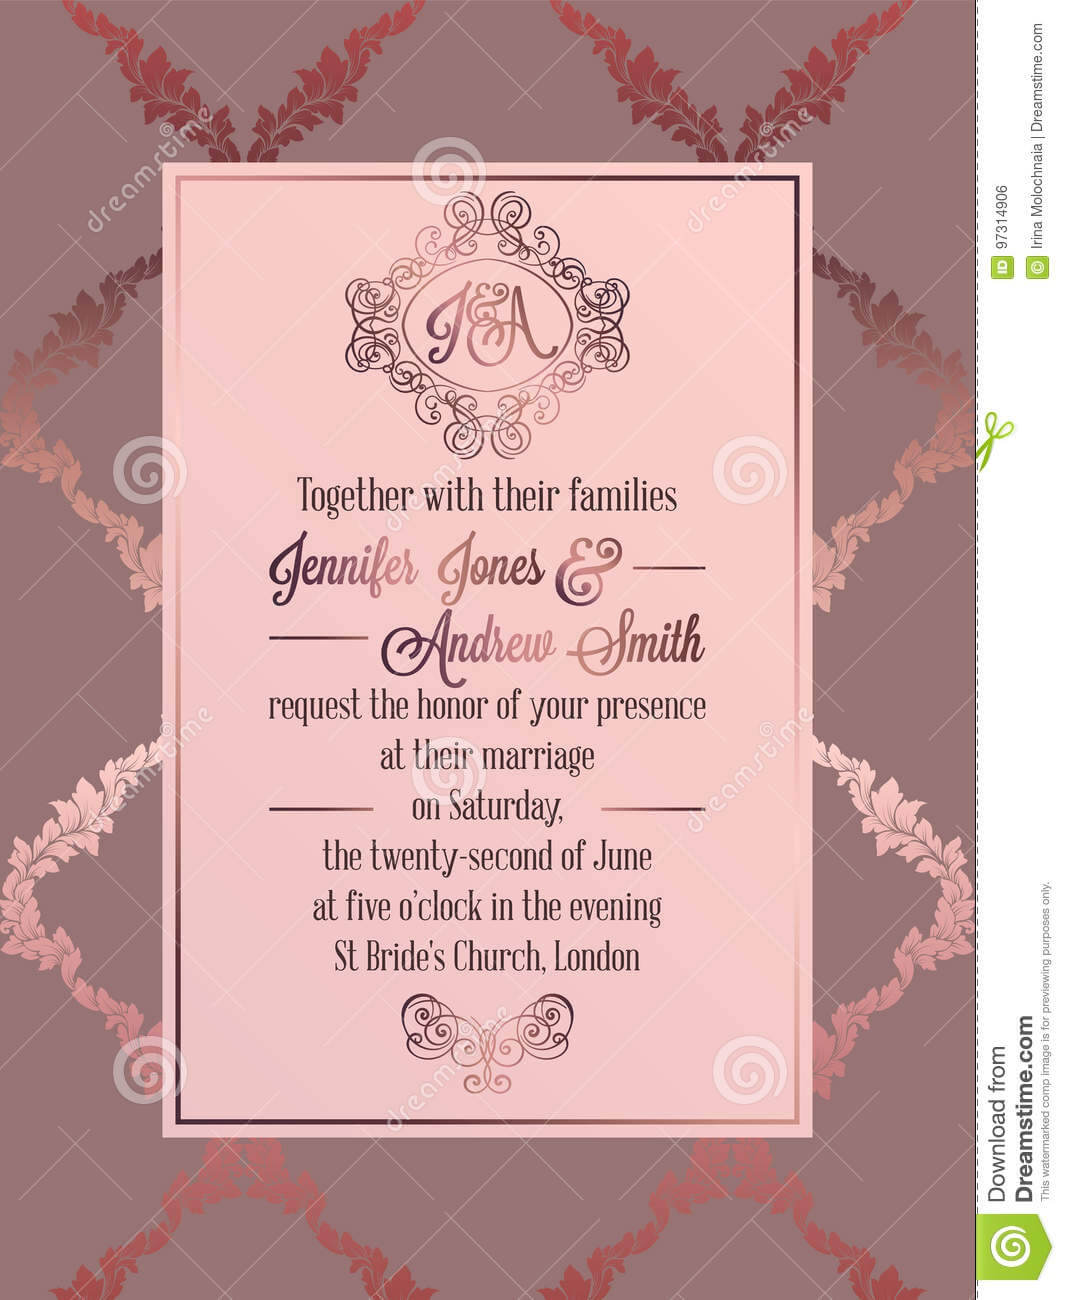 Vintage Baroque Style Wedding Invitation Card Template With Regard To Church Wedding Invitation Card Template